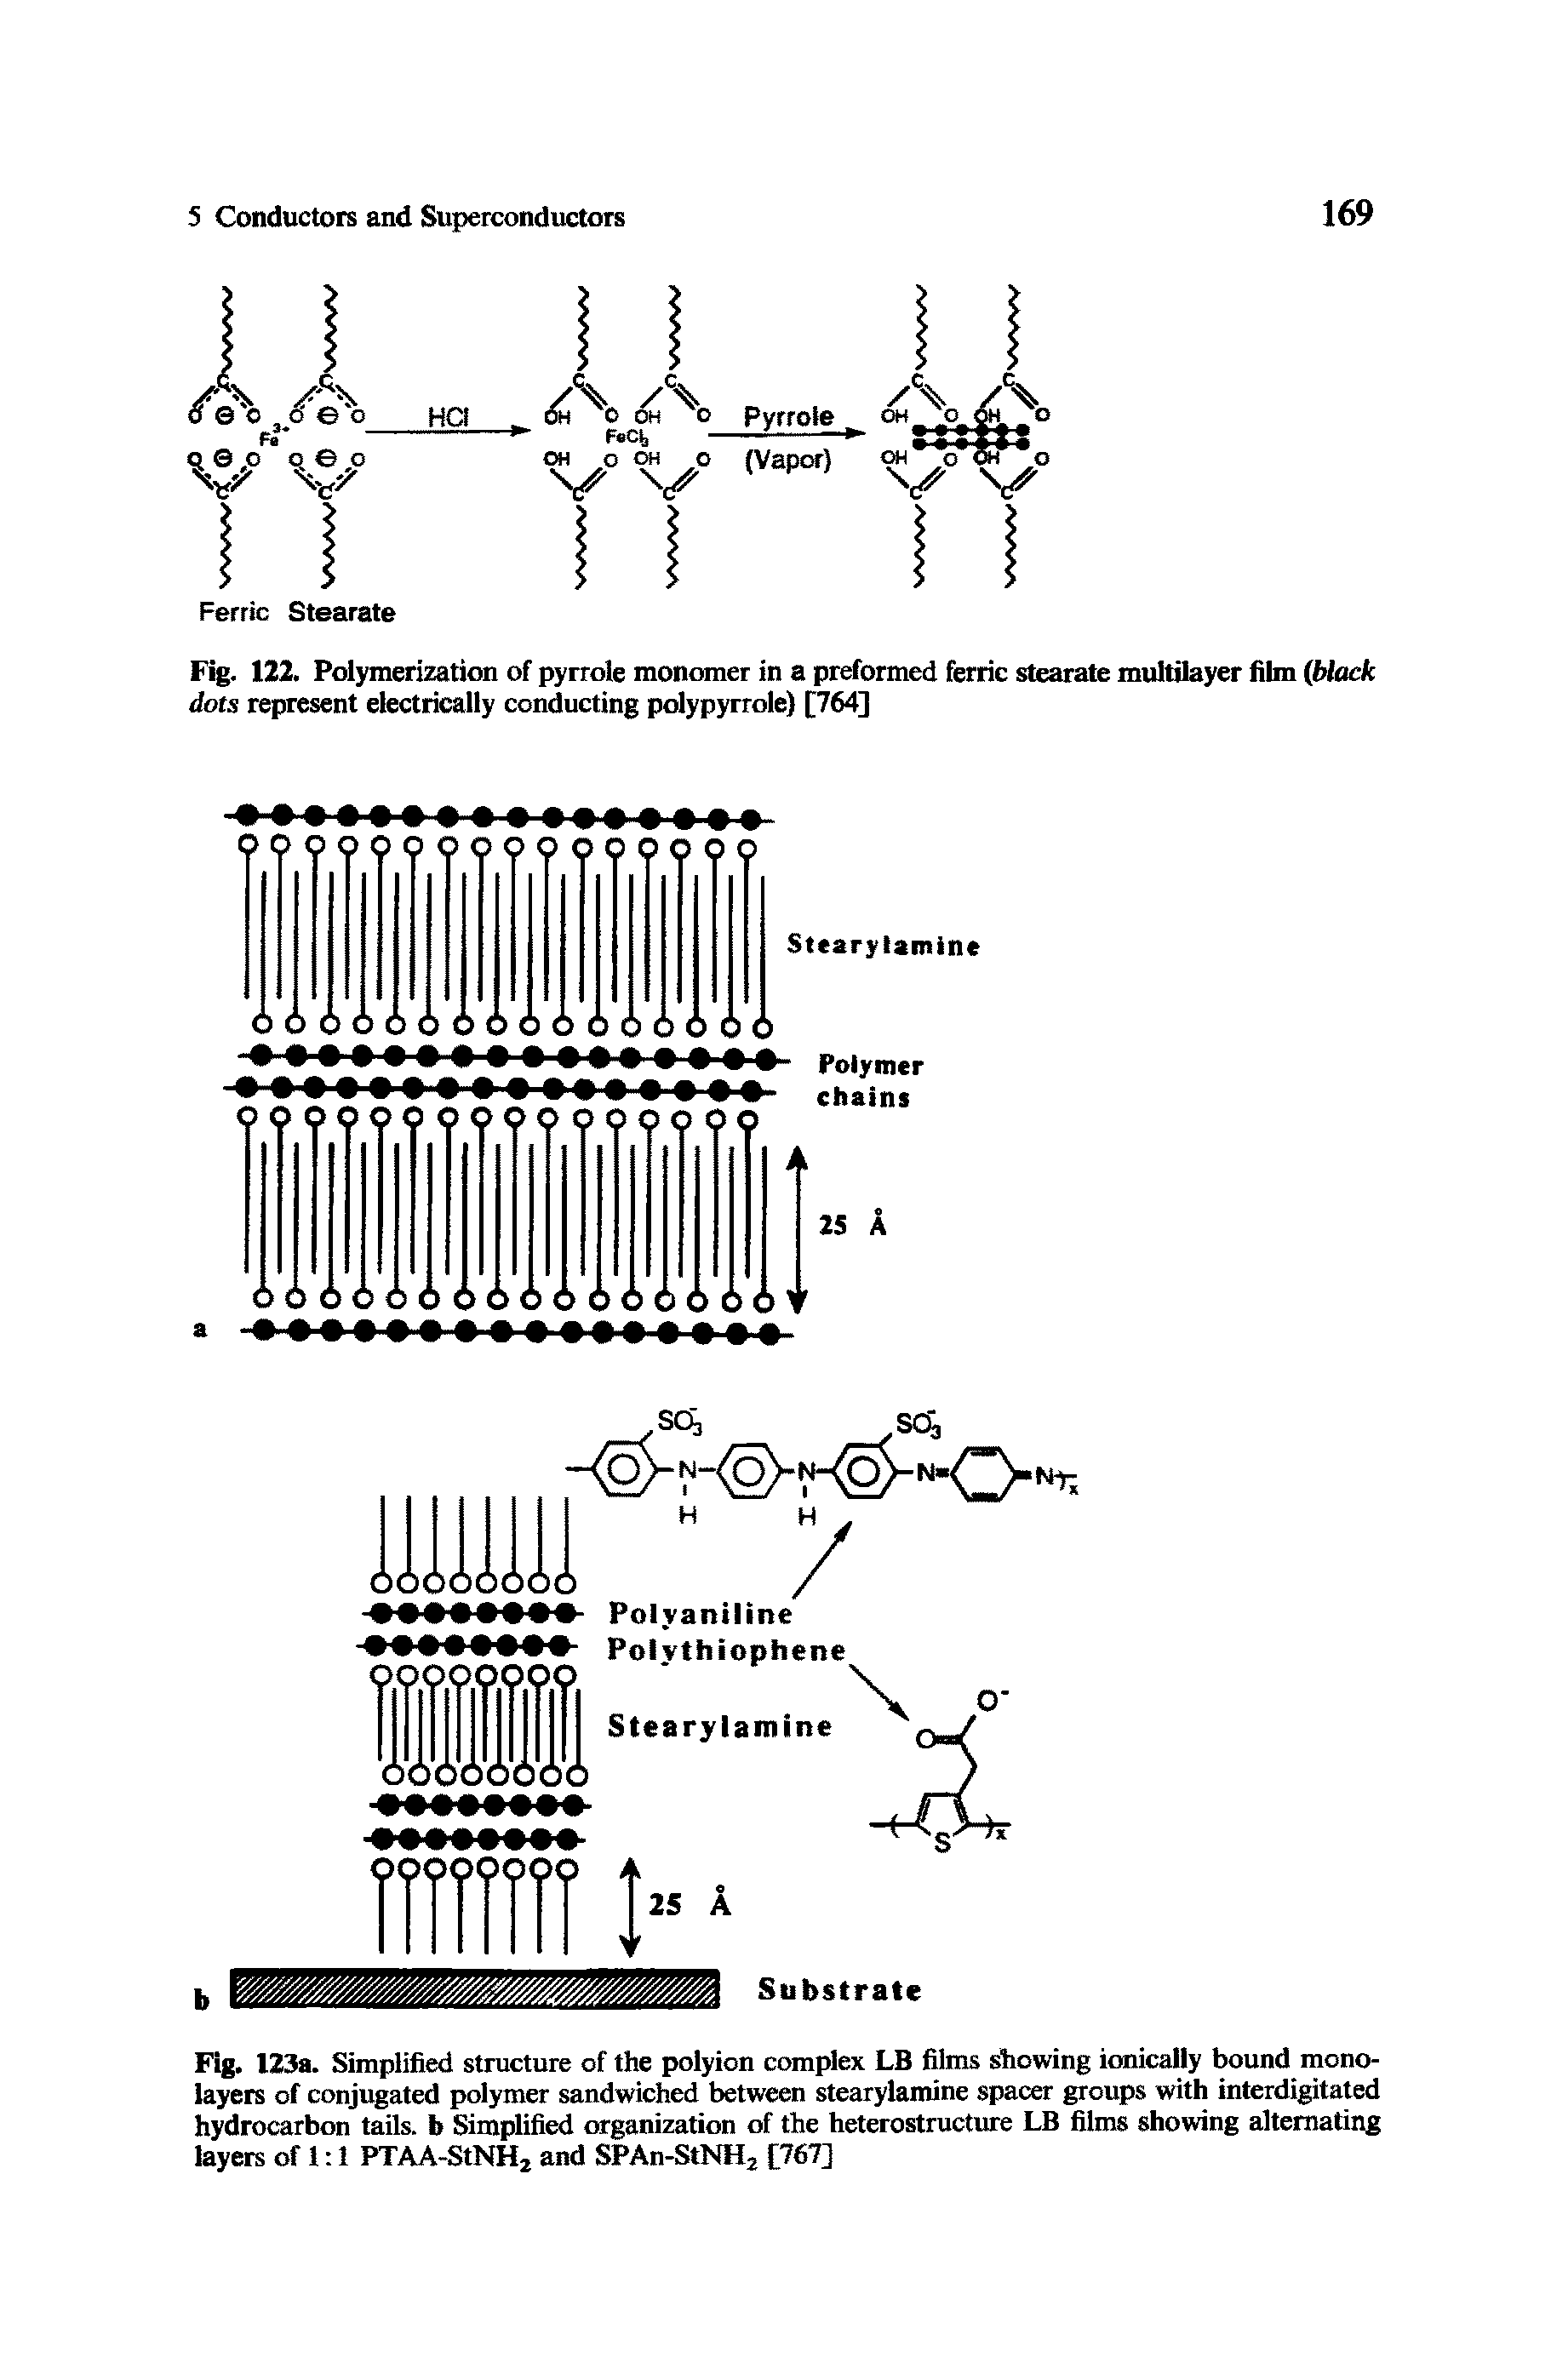 Fig. 123a. Simplified structure of the polyion complex LB films showing ionically bound mono-layers of conjugated polymer sandwiched between stearylamine spacer groups with interdigitated hydrocarbon tails, b Simplified organization of the heterostructure LB films showing alternating layers of 1 1 PTAA-StNH2 and SPAn-StNH2 [767]...